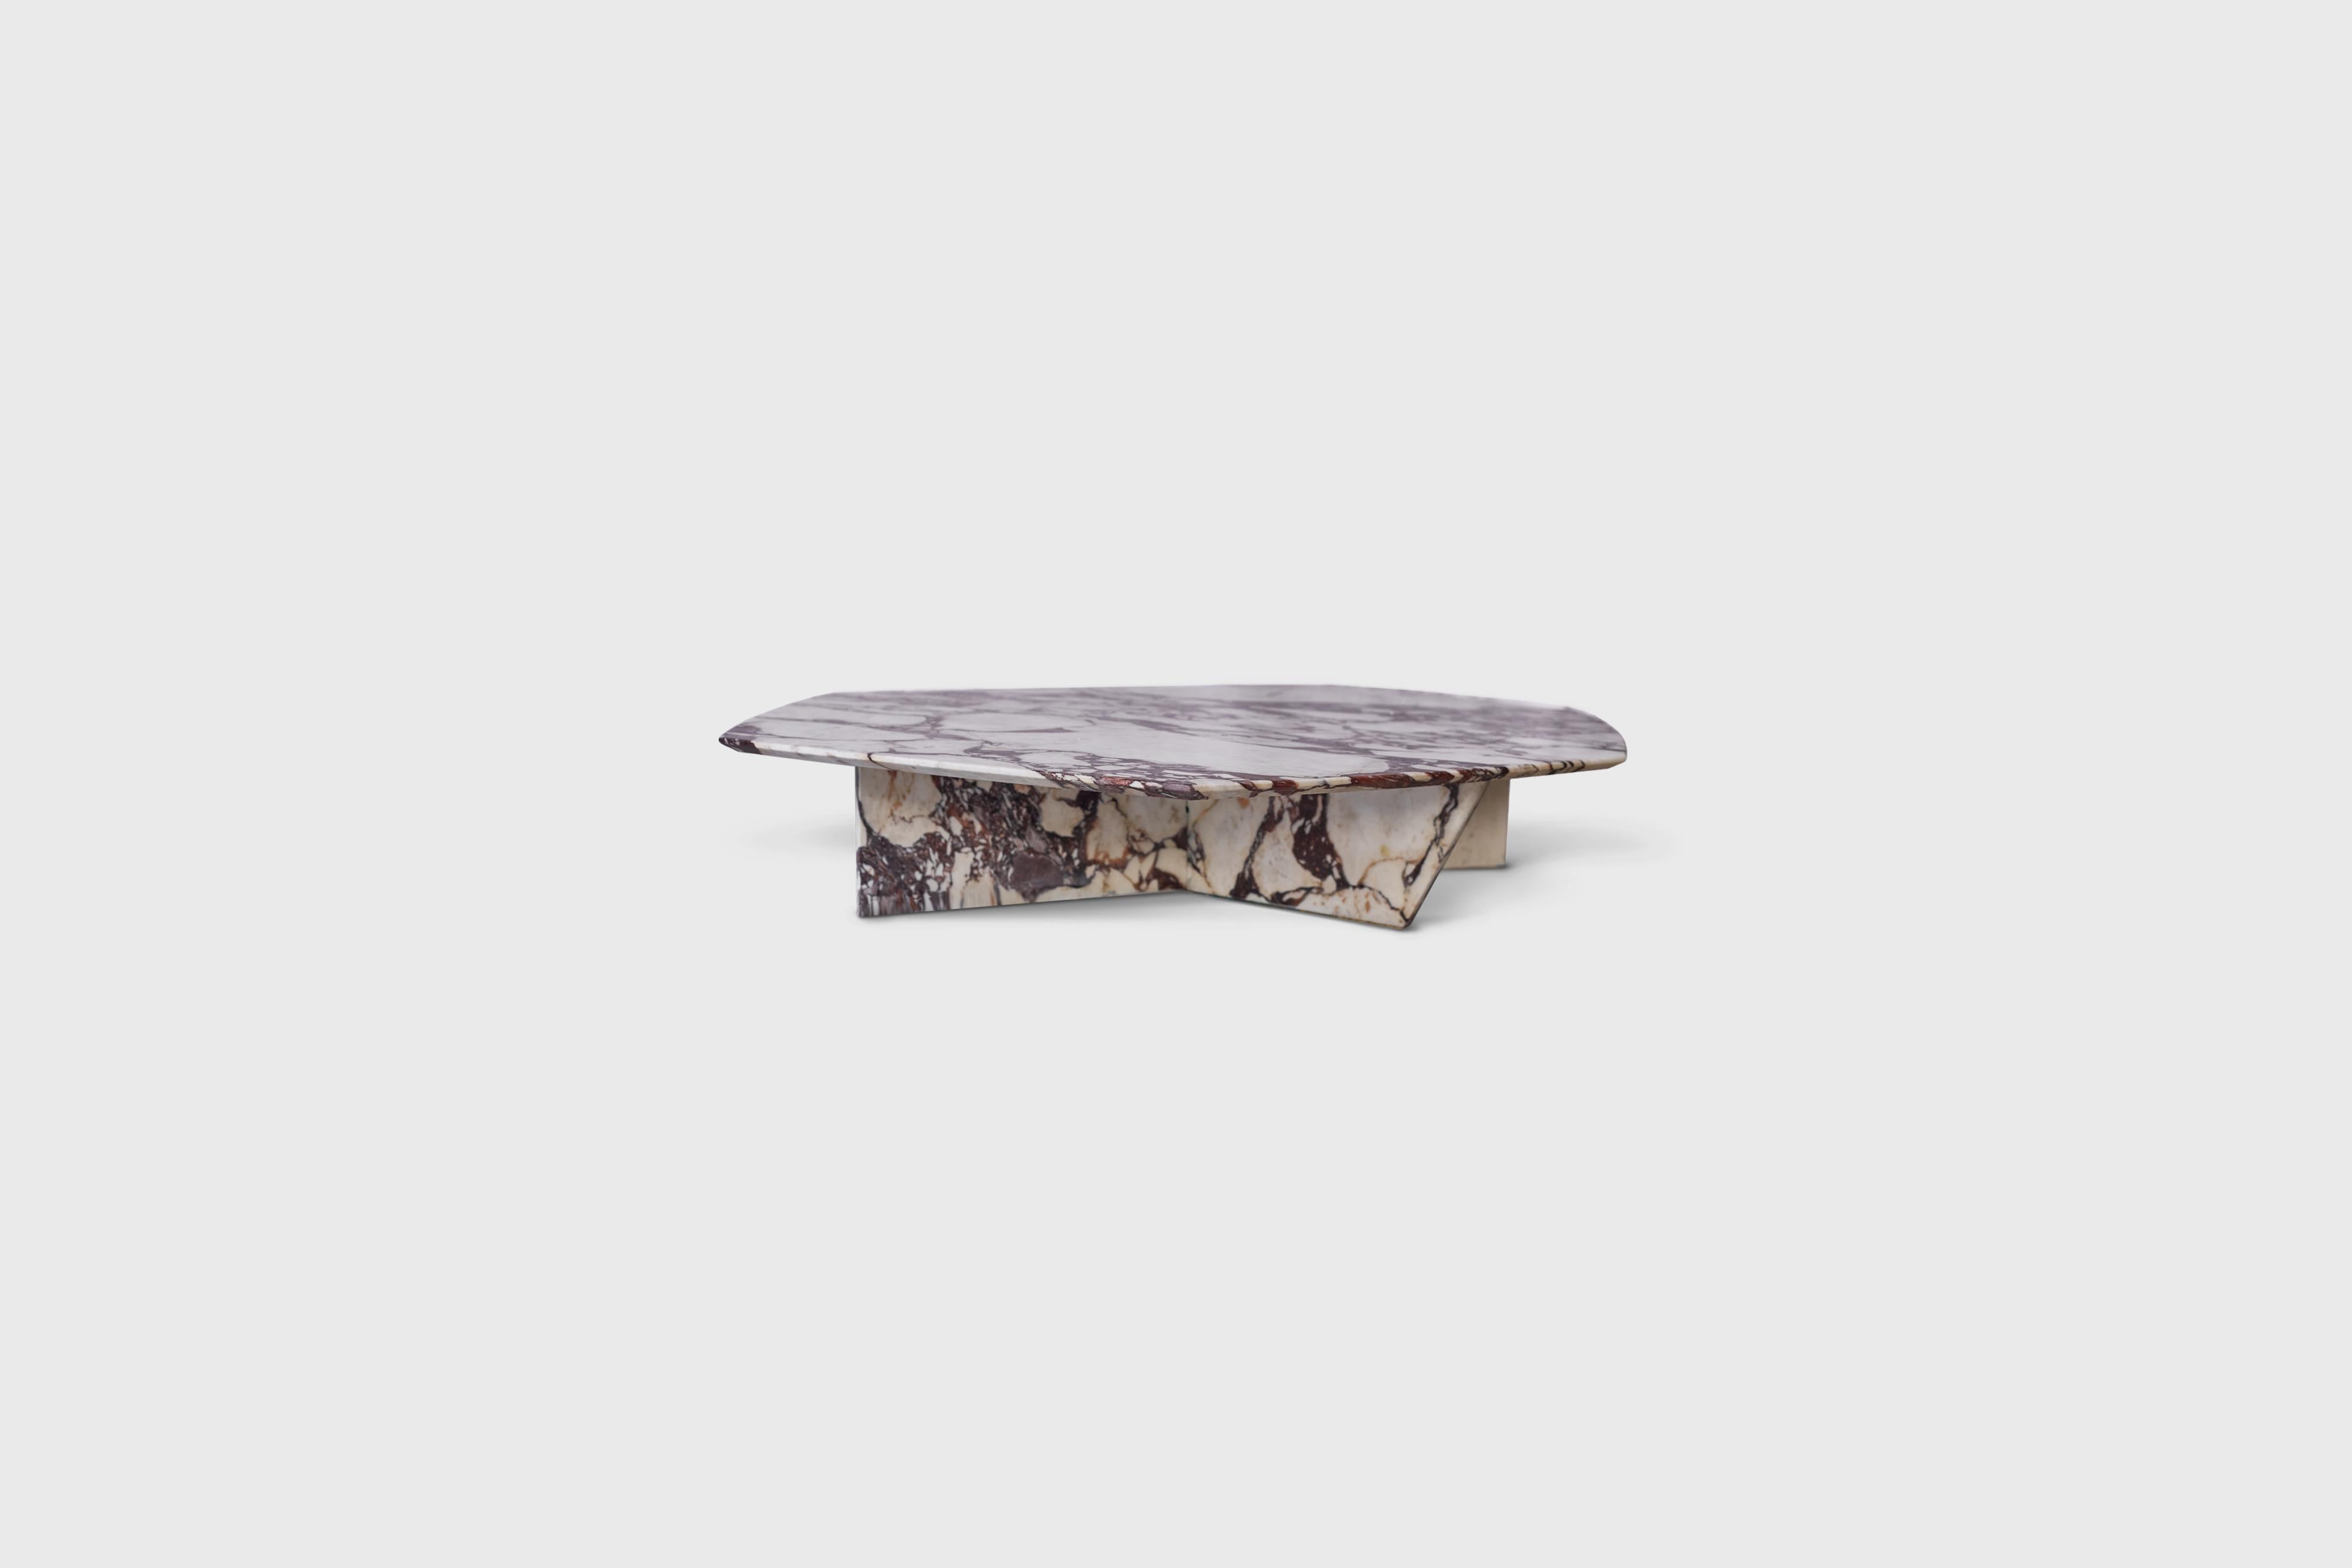 Geometrik Calacatta Viola Small Coffee Table by Atra Design
Dimensions: D 90 x W 130 x H 32 cm.
Materials: Calacatta Viola marble and cladded steel.

Available in three sizes. Different marble options available: Verde Tikal, Negro Monterrey,